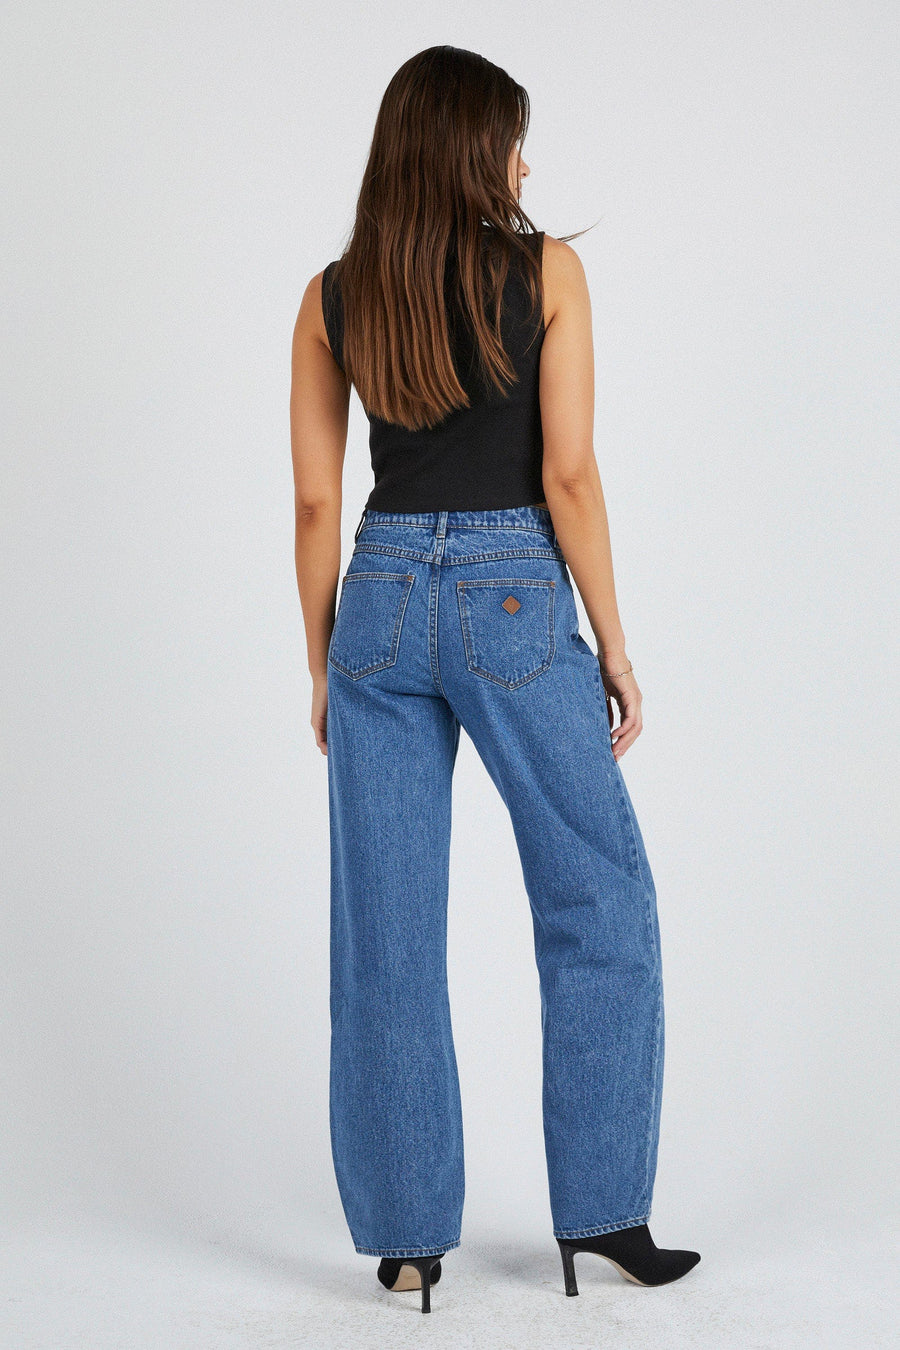 Abrand - 95 Baggy Liliana Jean in Mid Blue